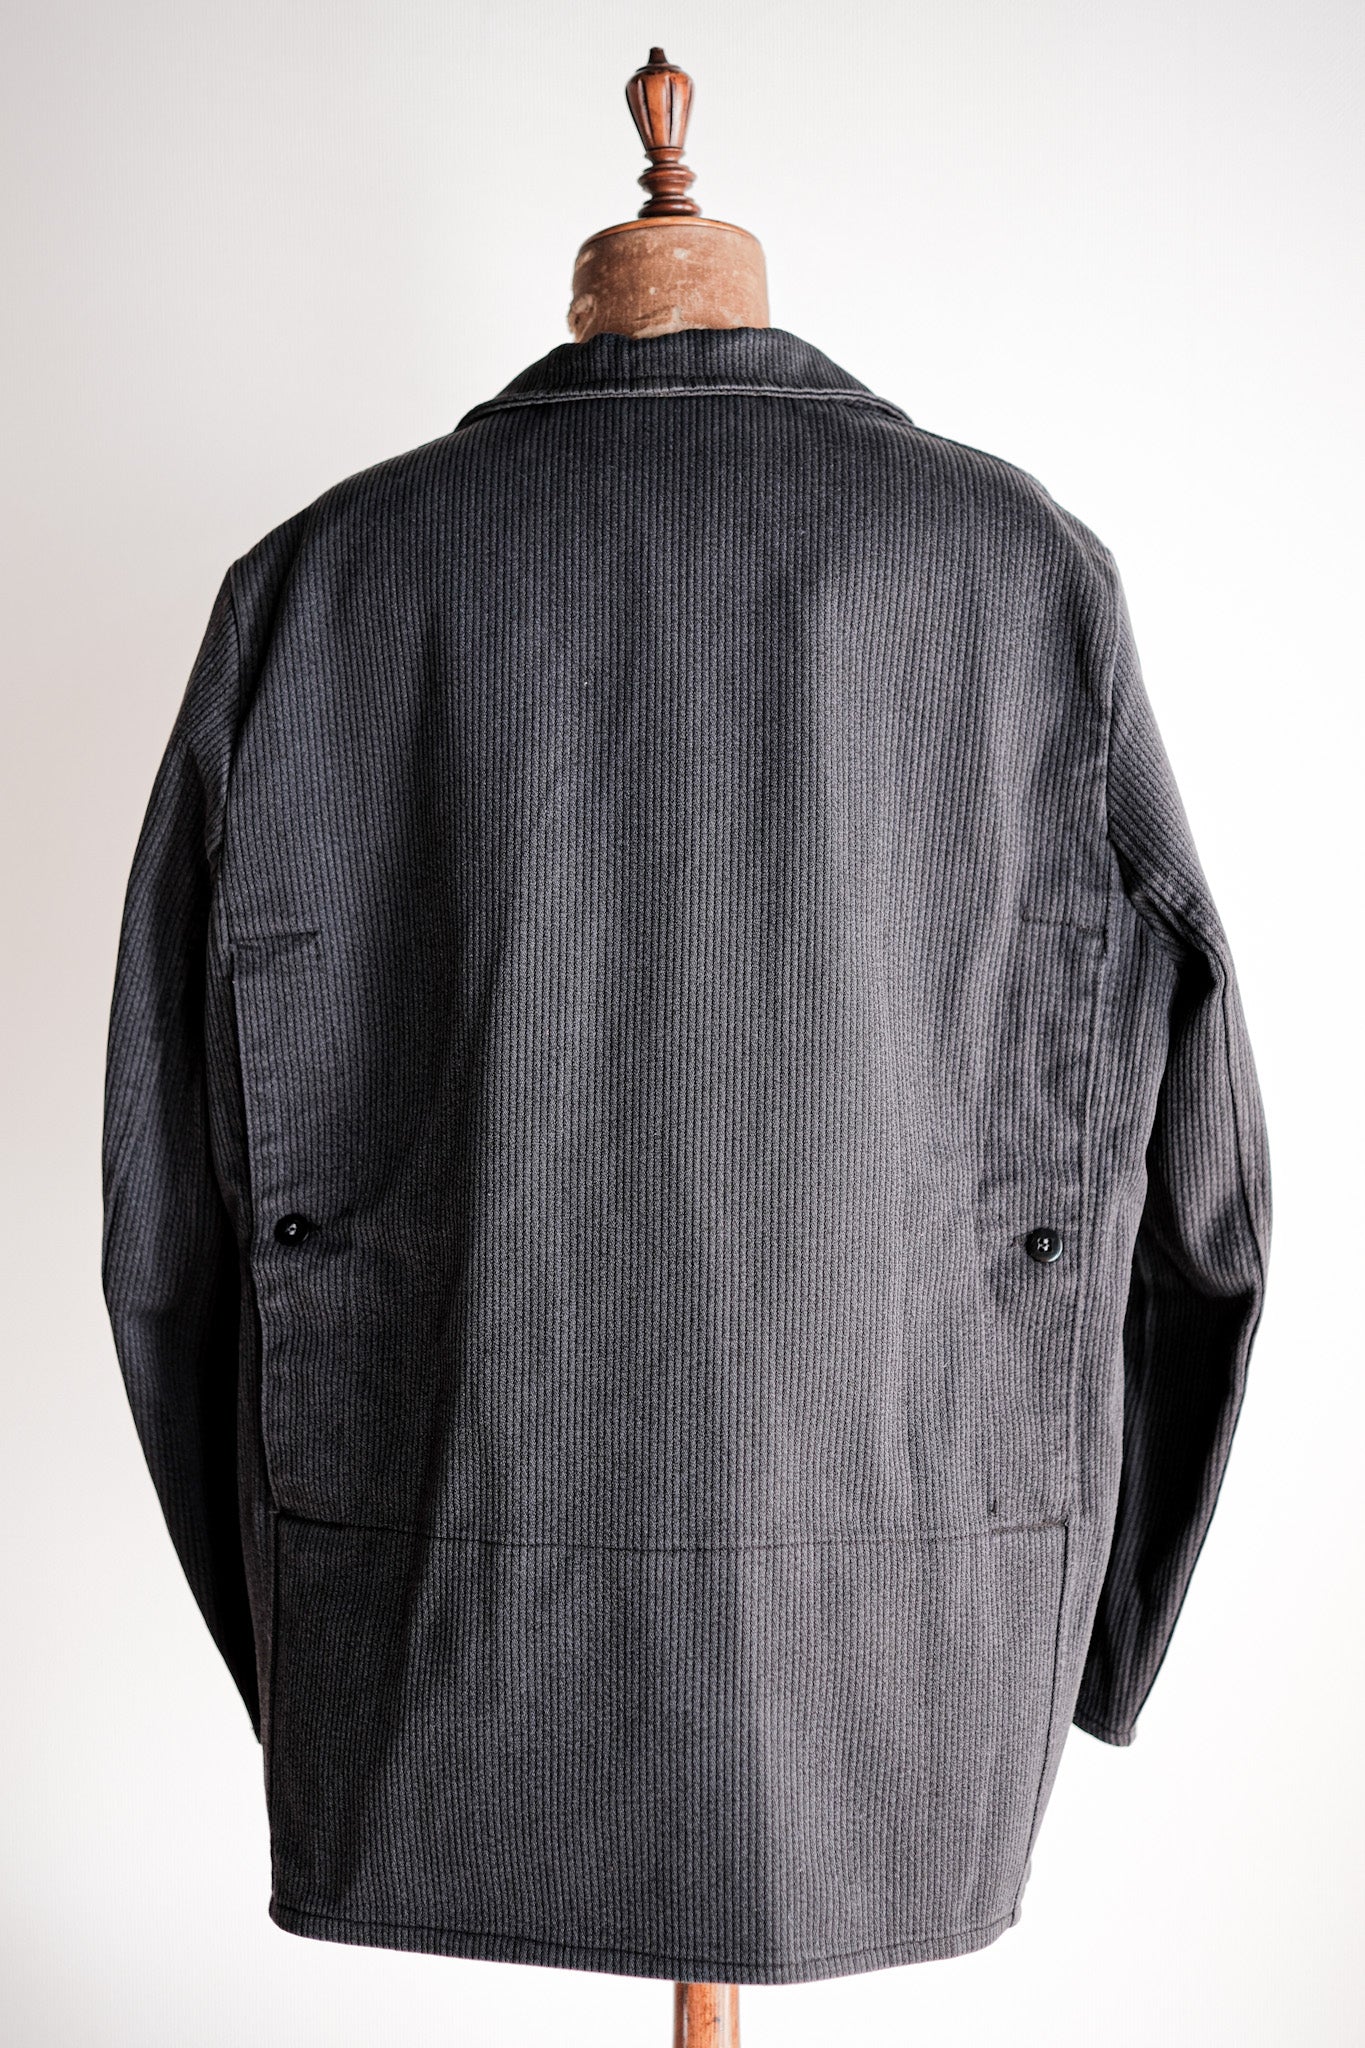 【~60's】French Vintage Blue Gray Cotton Pique Hunting Jacket